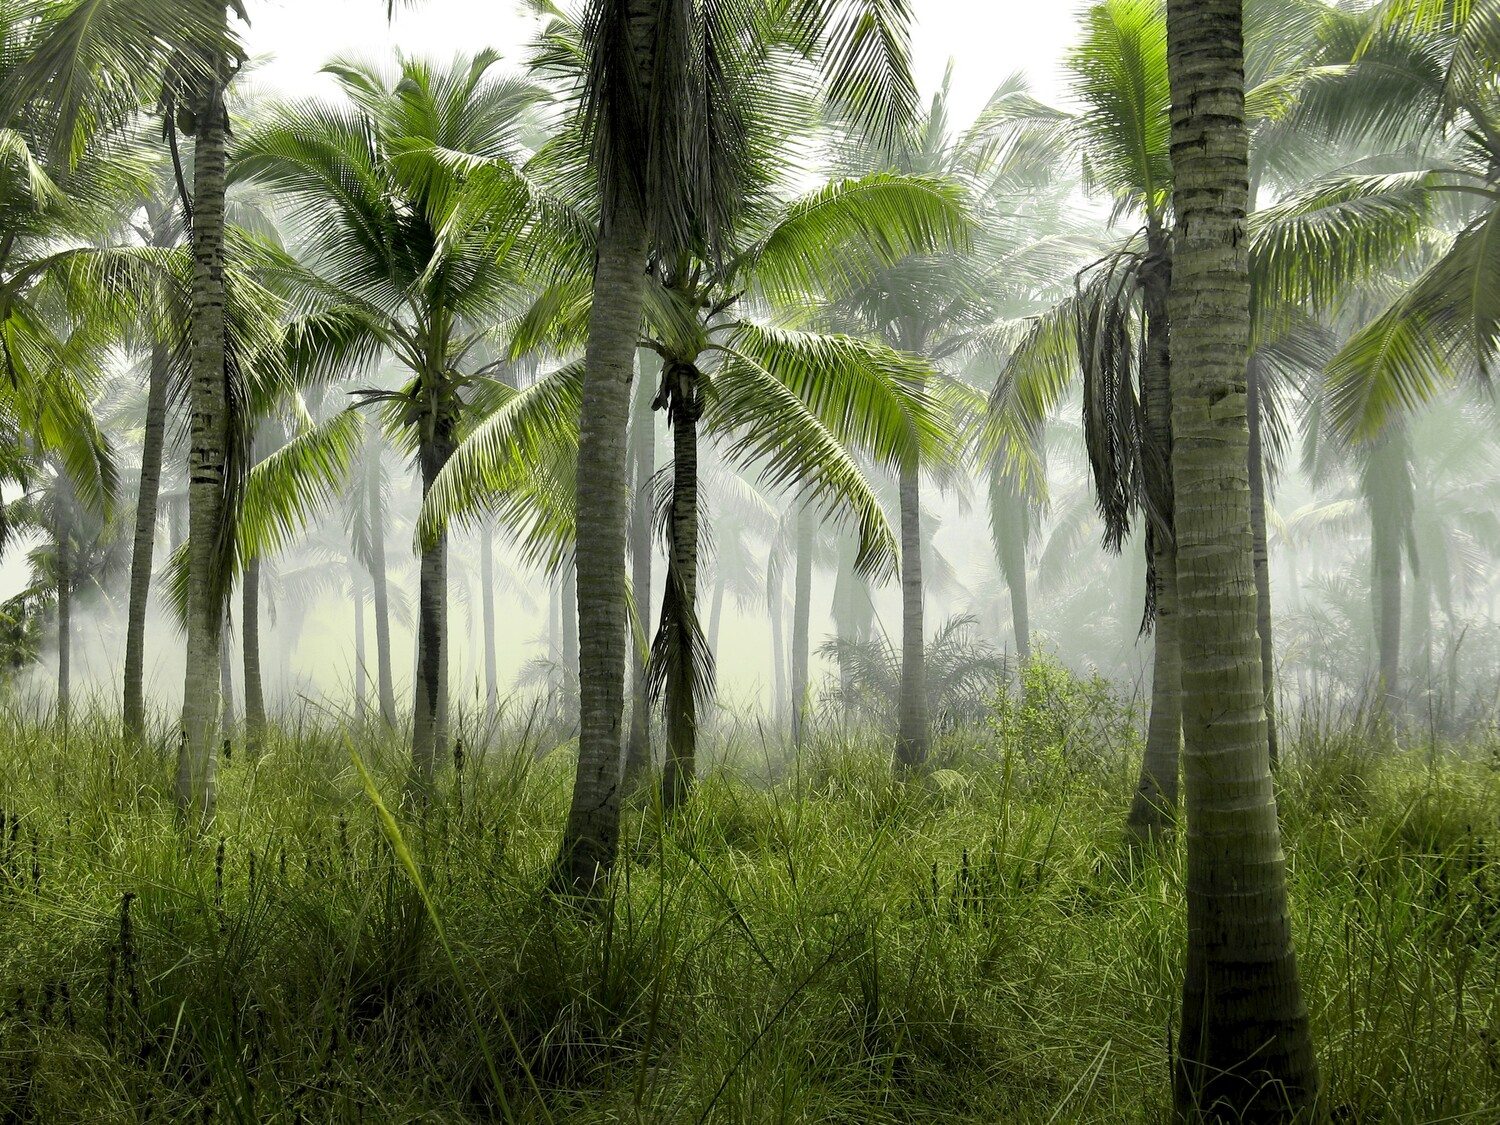 Are We Palm Oil Trees?